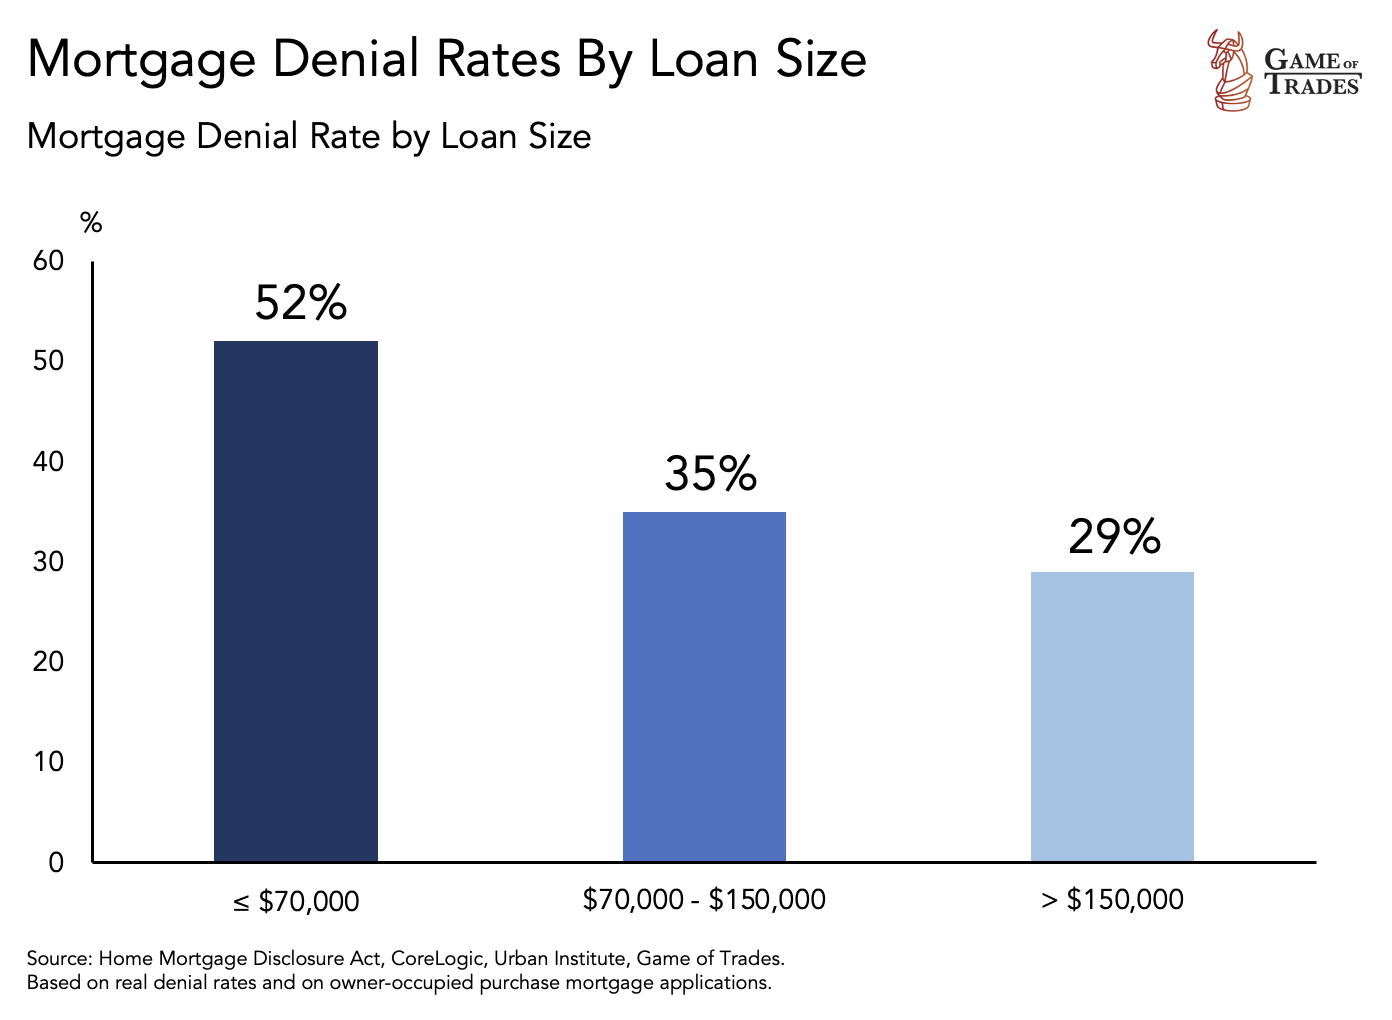 Mortgage denial rate by loan size